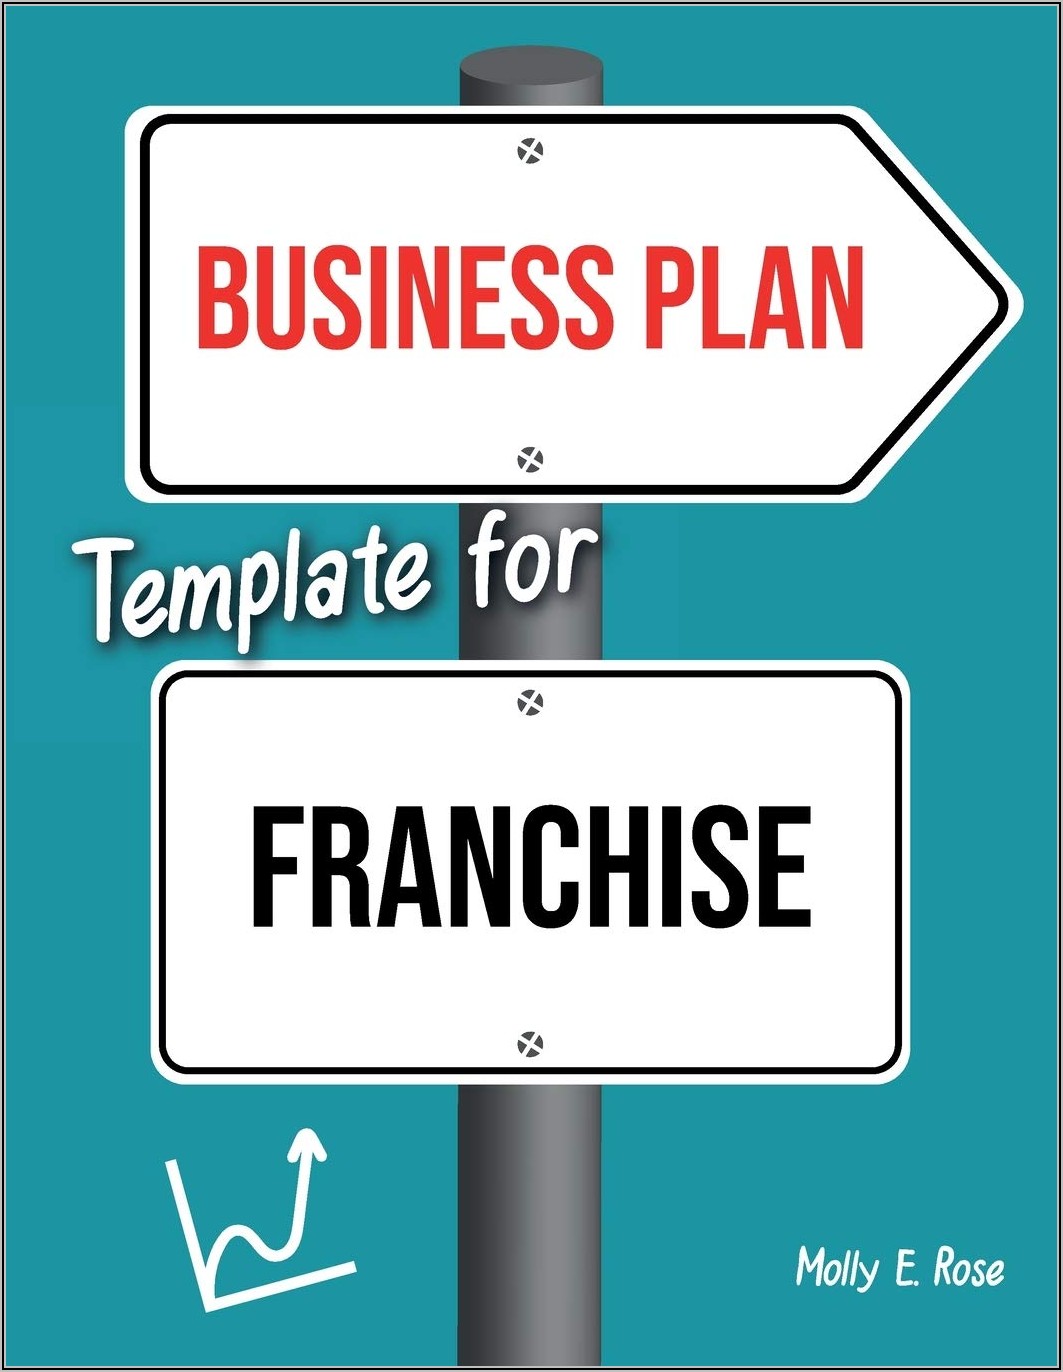 Business Plan Template For Franchise